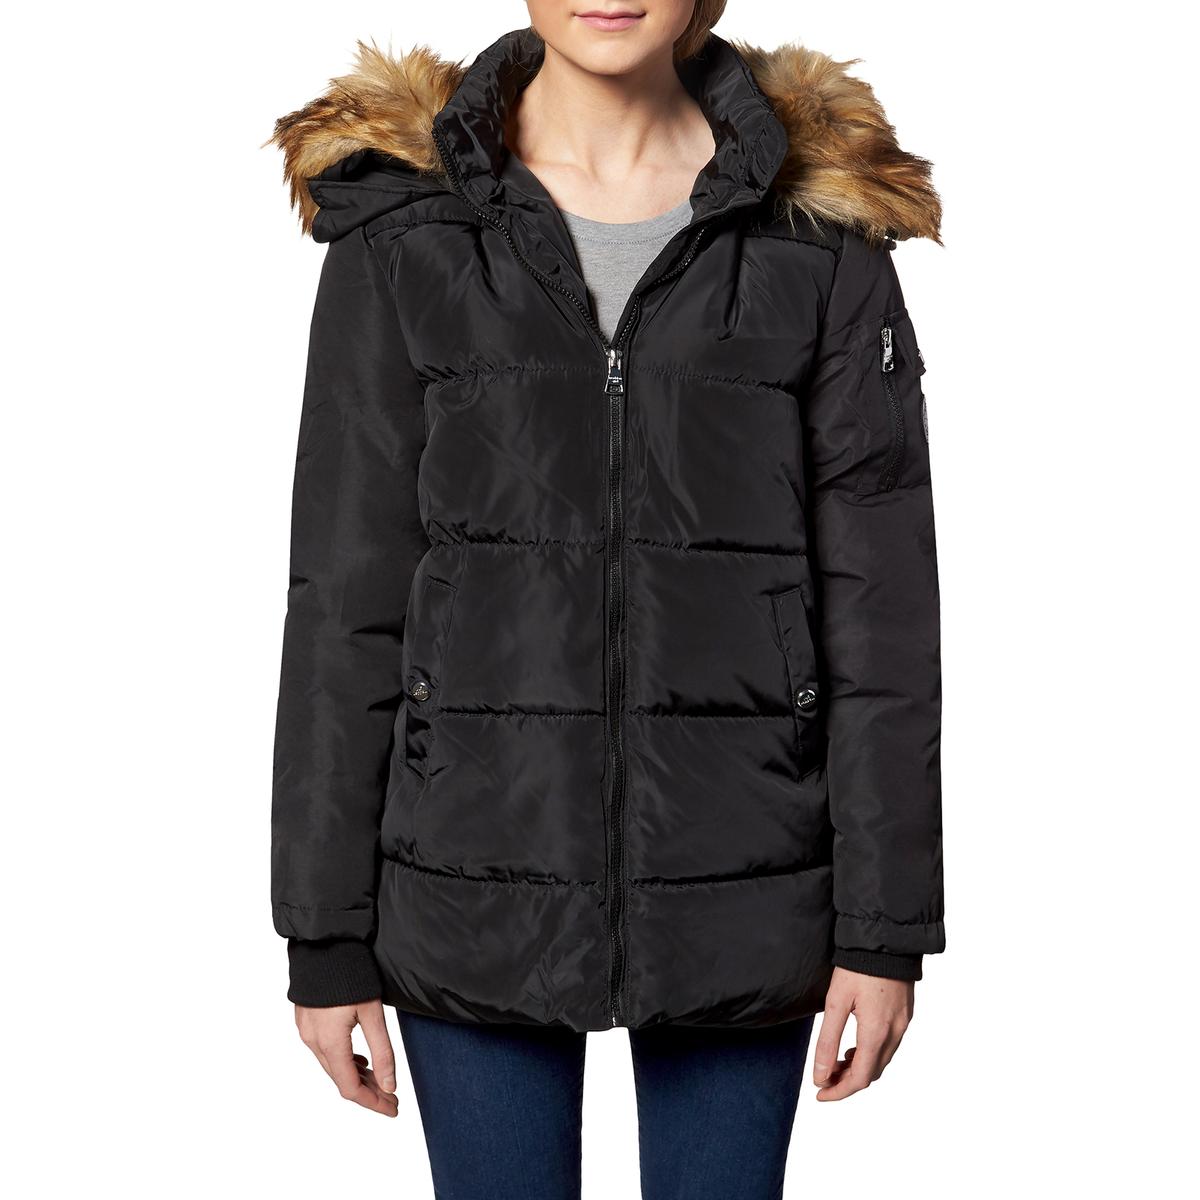 Madden Girl Women's Quilted Faux Fur Trim Hooded Convertible Winter ...